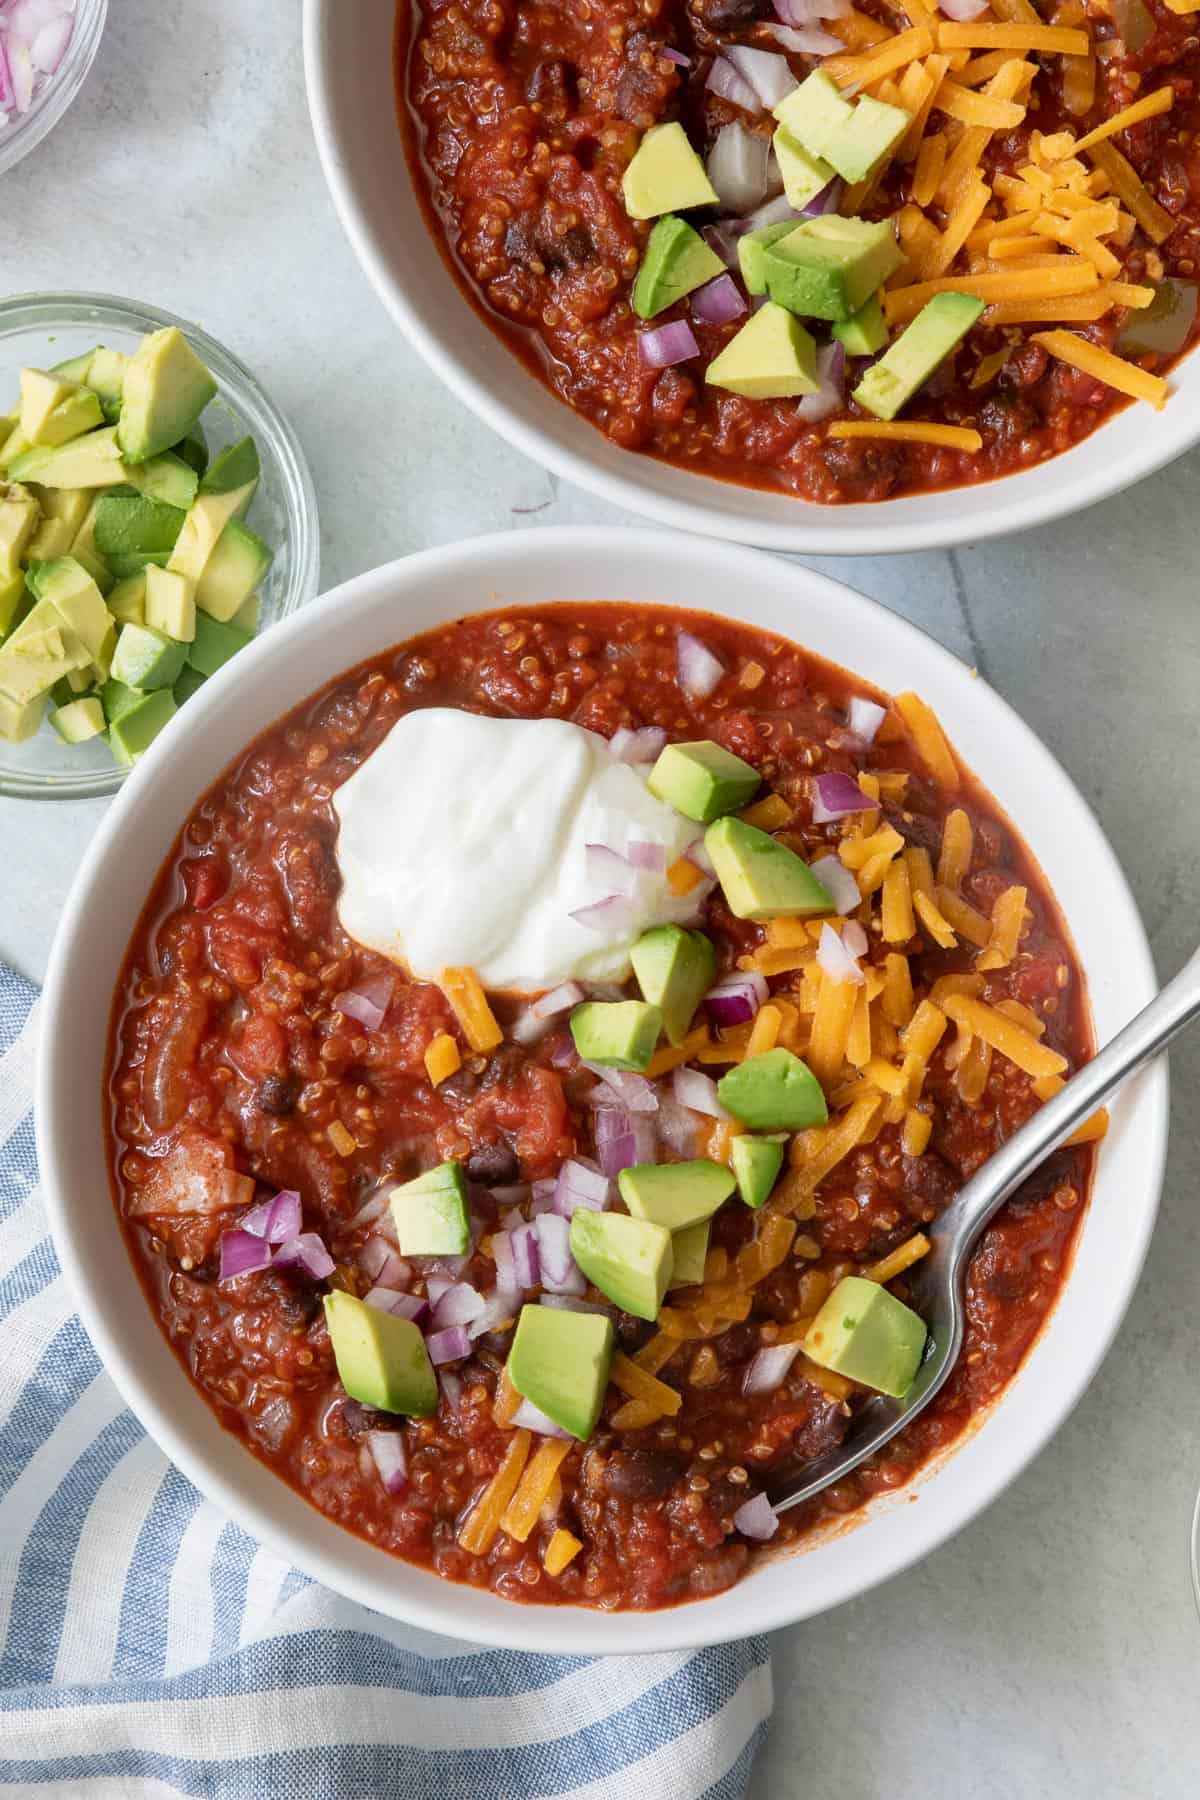 Overhead shot of chili in a white bowl with another filled bowl off to the side.